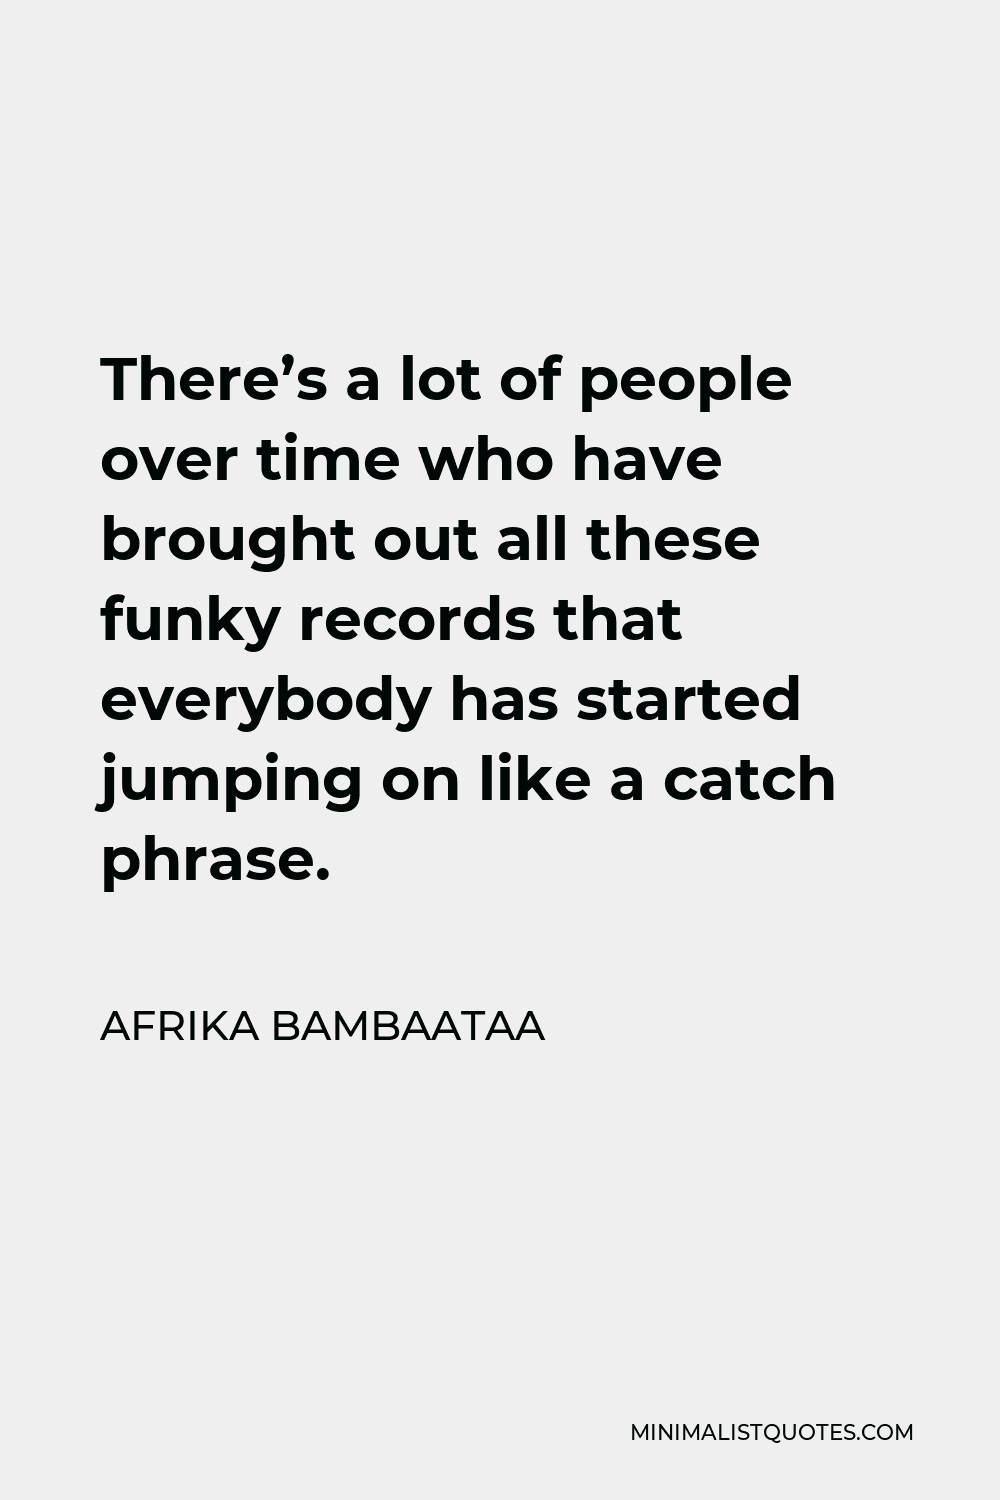 Afrika Bambaataa Quote - There’s a lot of people over time who have brought out all these funky records that everybody has started jumping on like a catch phrase.